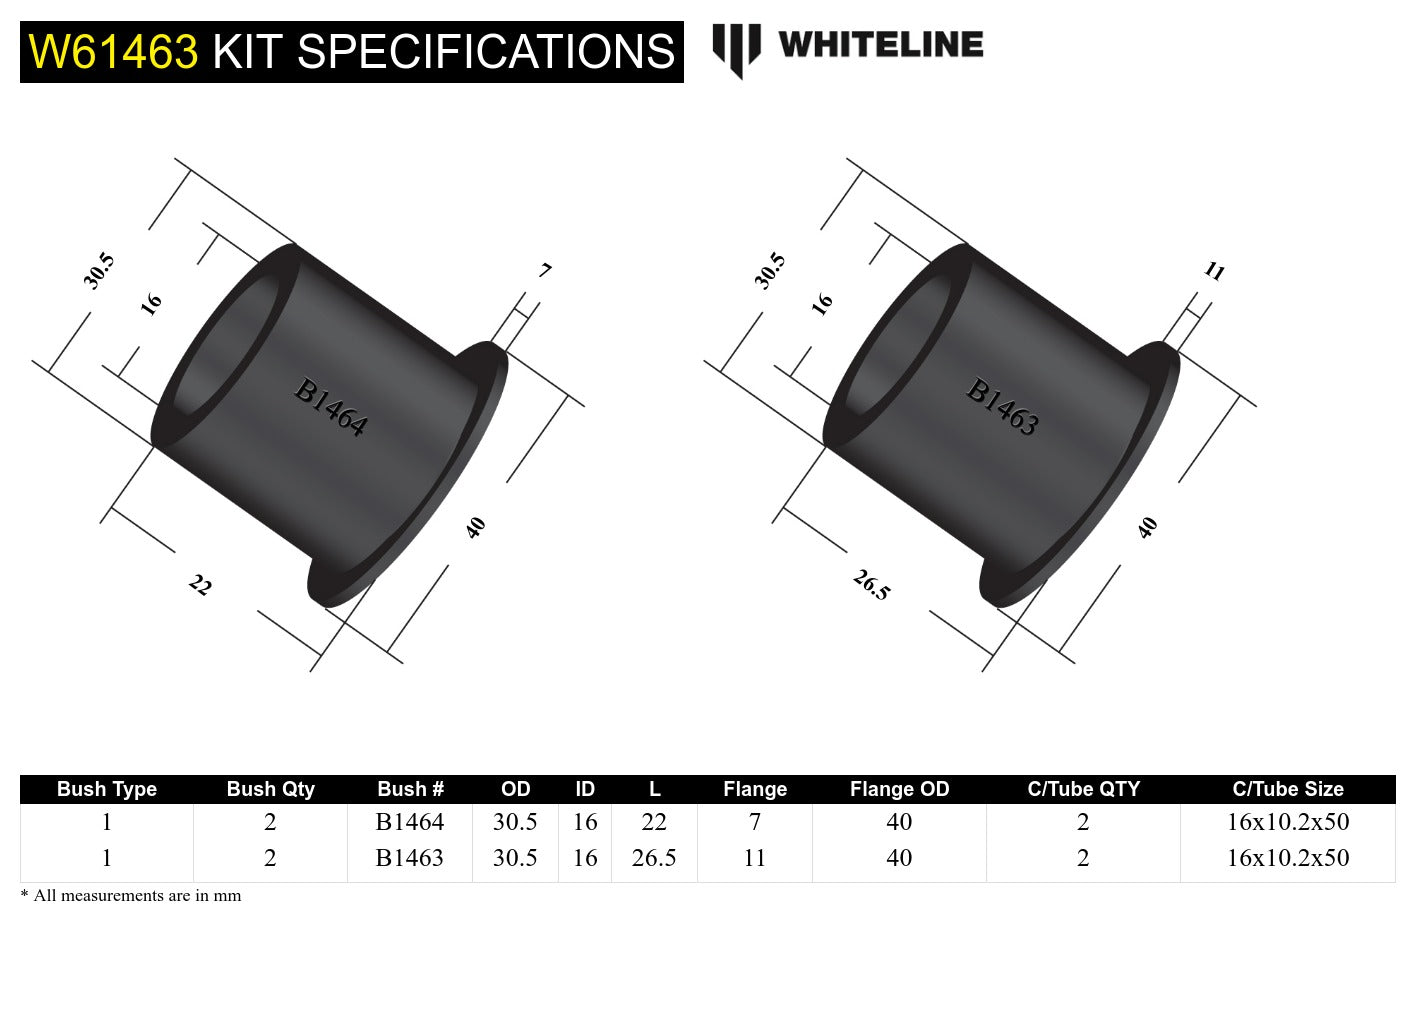 Control arm - lower outer bushing